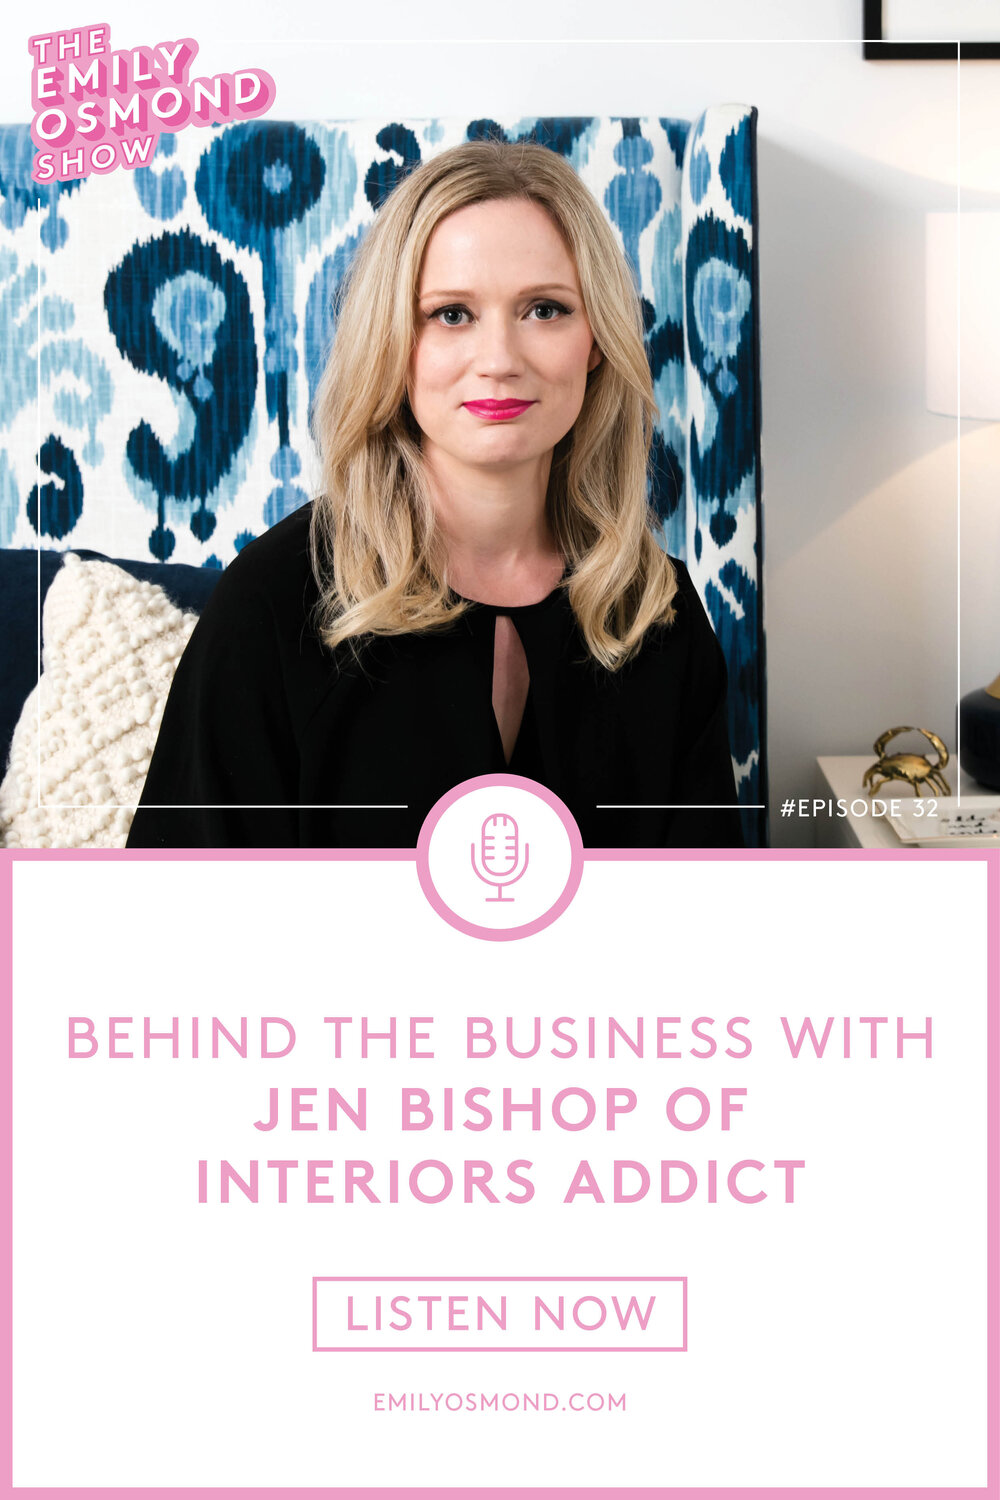 Emily Osmond Show_Episode_Pinterest_32_Behind the Business with Jen.jpg